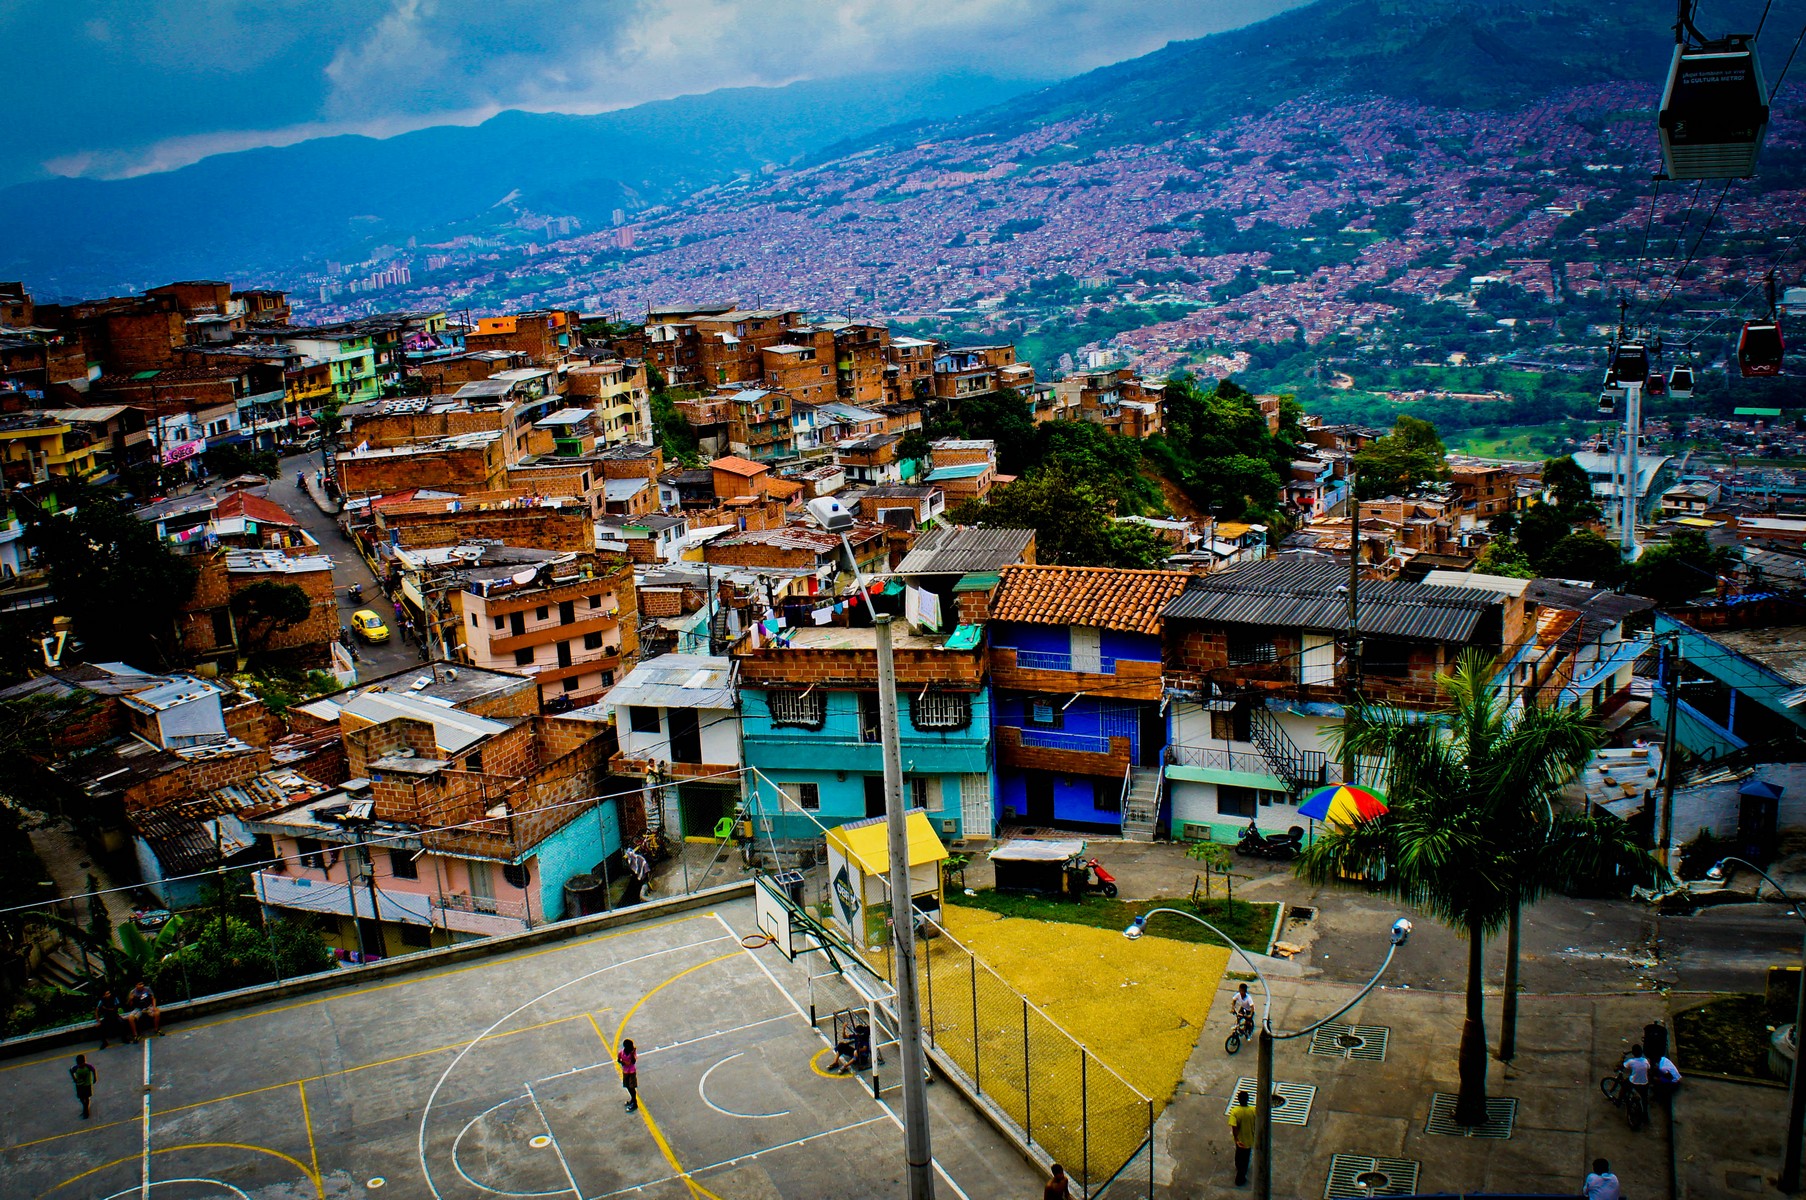 The Boy From Medellín”: Delving Into the Up Close and Personal